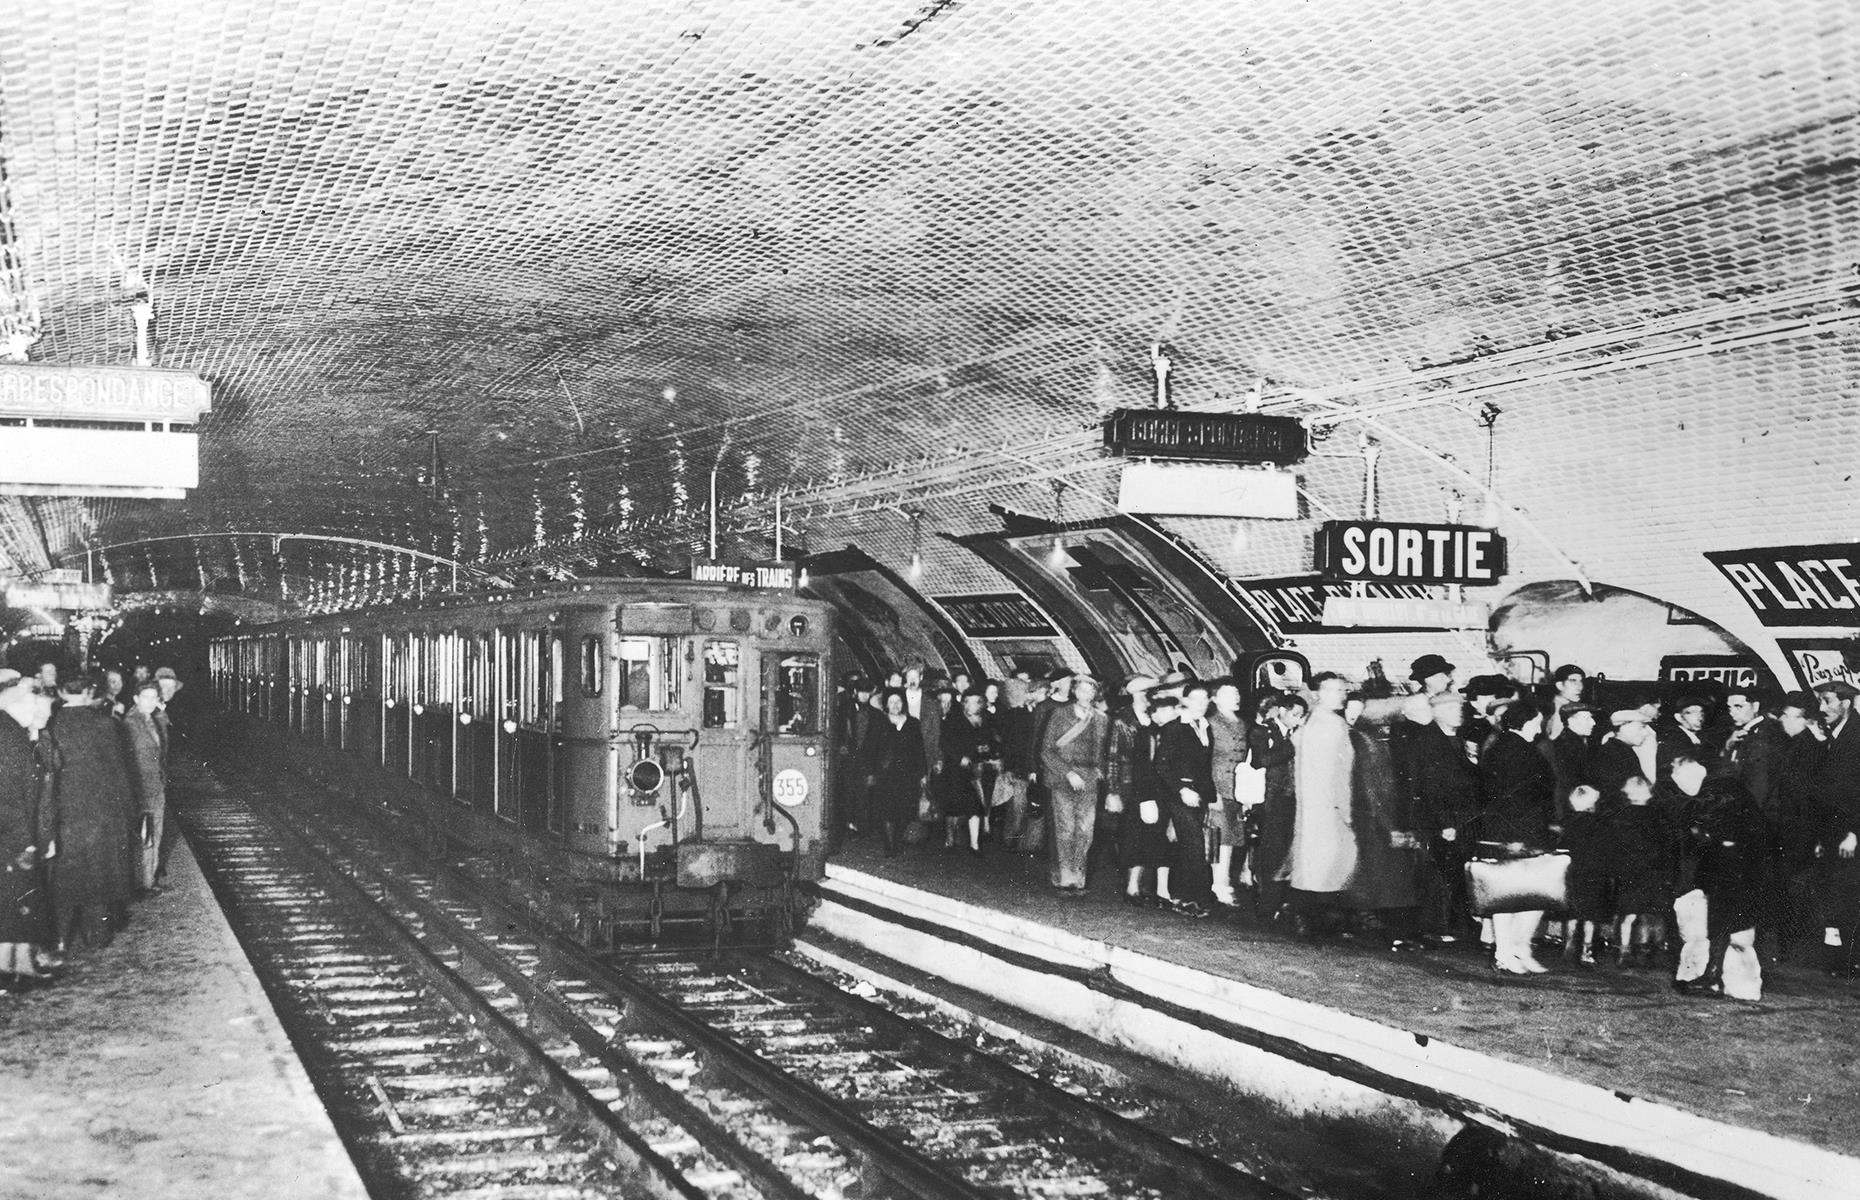 <p>Today, the Paris Métro, which opened right at the turn of the century, is renowned for its striking Art Nouveau-style subway entrances and its perpetual buzz – it's tipped as one of the busiest subway systems in the world. It's even bustling in this circa-1940 photograph. The shot shows the Place d'Italie metro station heaving with commuters.</p>  <p><strong><a href="https://www.loveexploring.com/galleries/82456/stunning-pictures-of-the-worlds-most-beautiful-train-stations">Marvel at these images of the world's most beautiful train stations</a></strong></p>